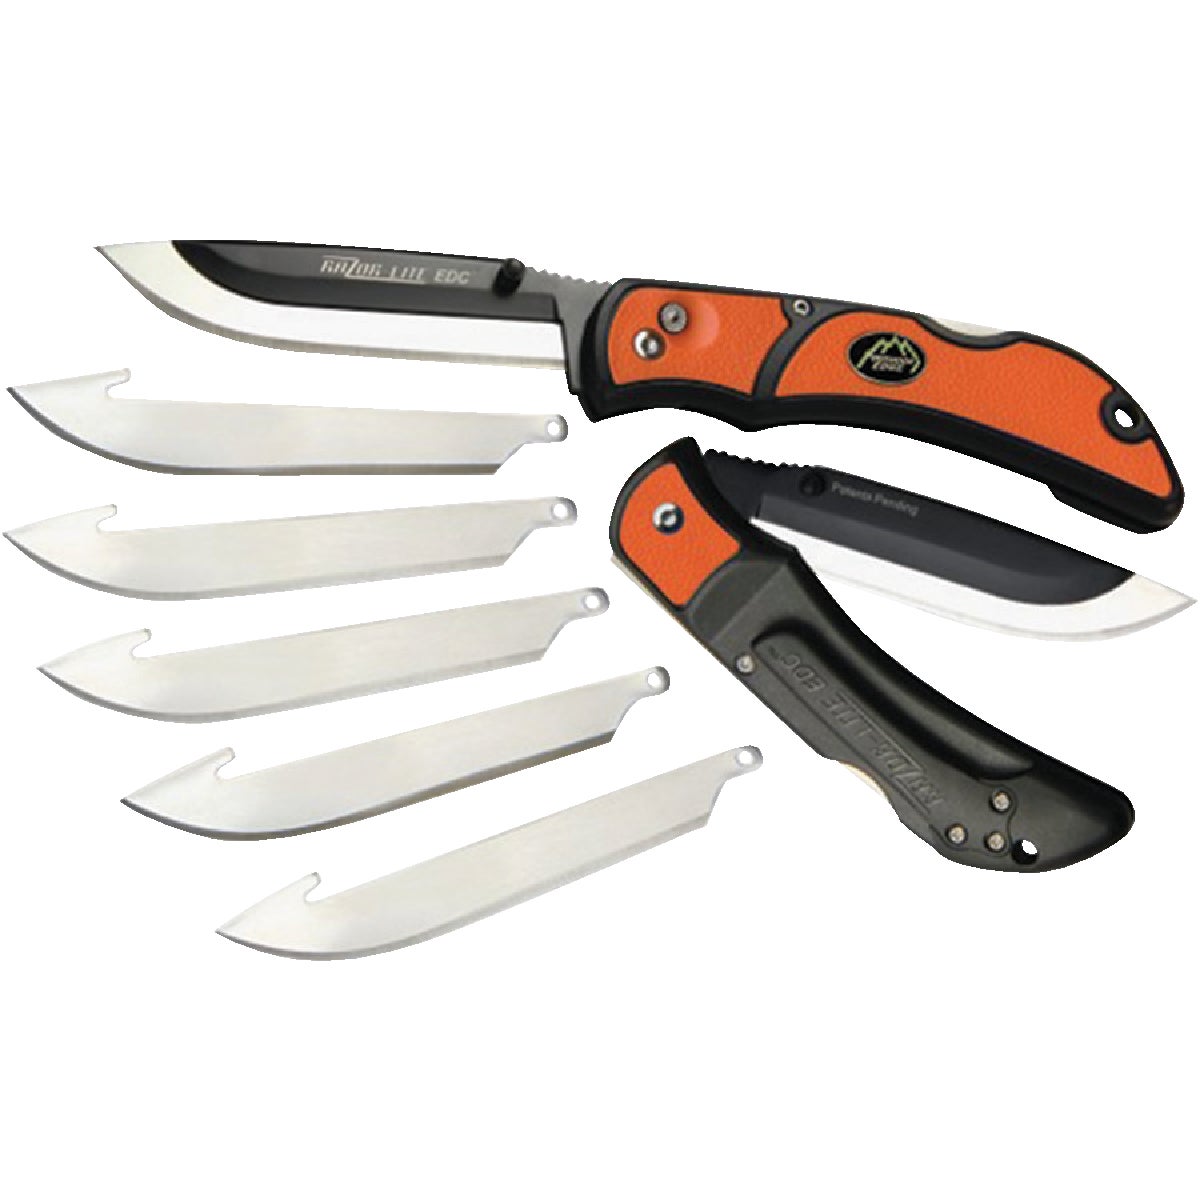 Item 705034, Folding knife with easy to replace blades.